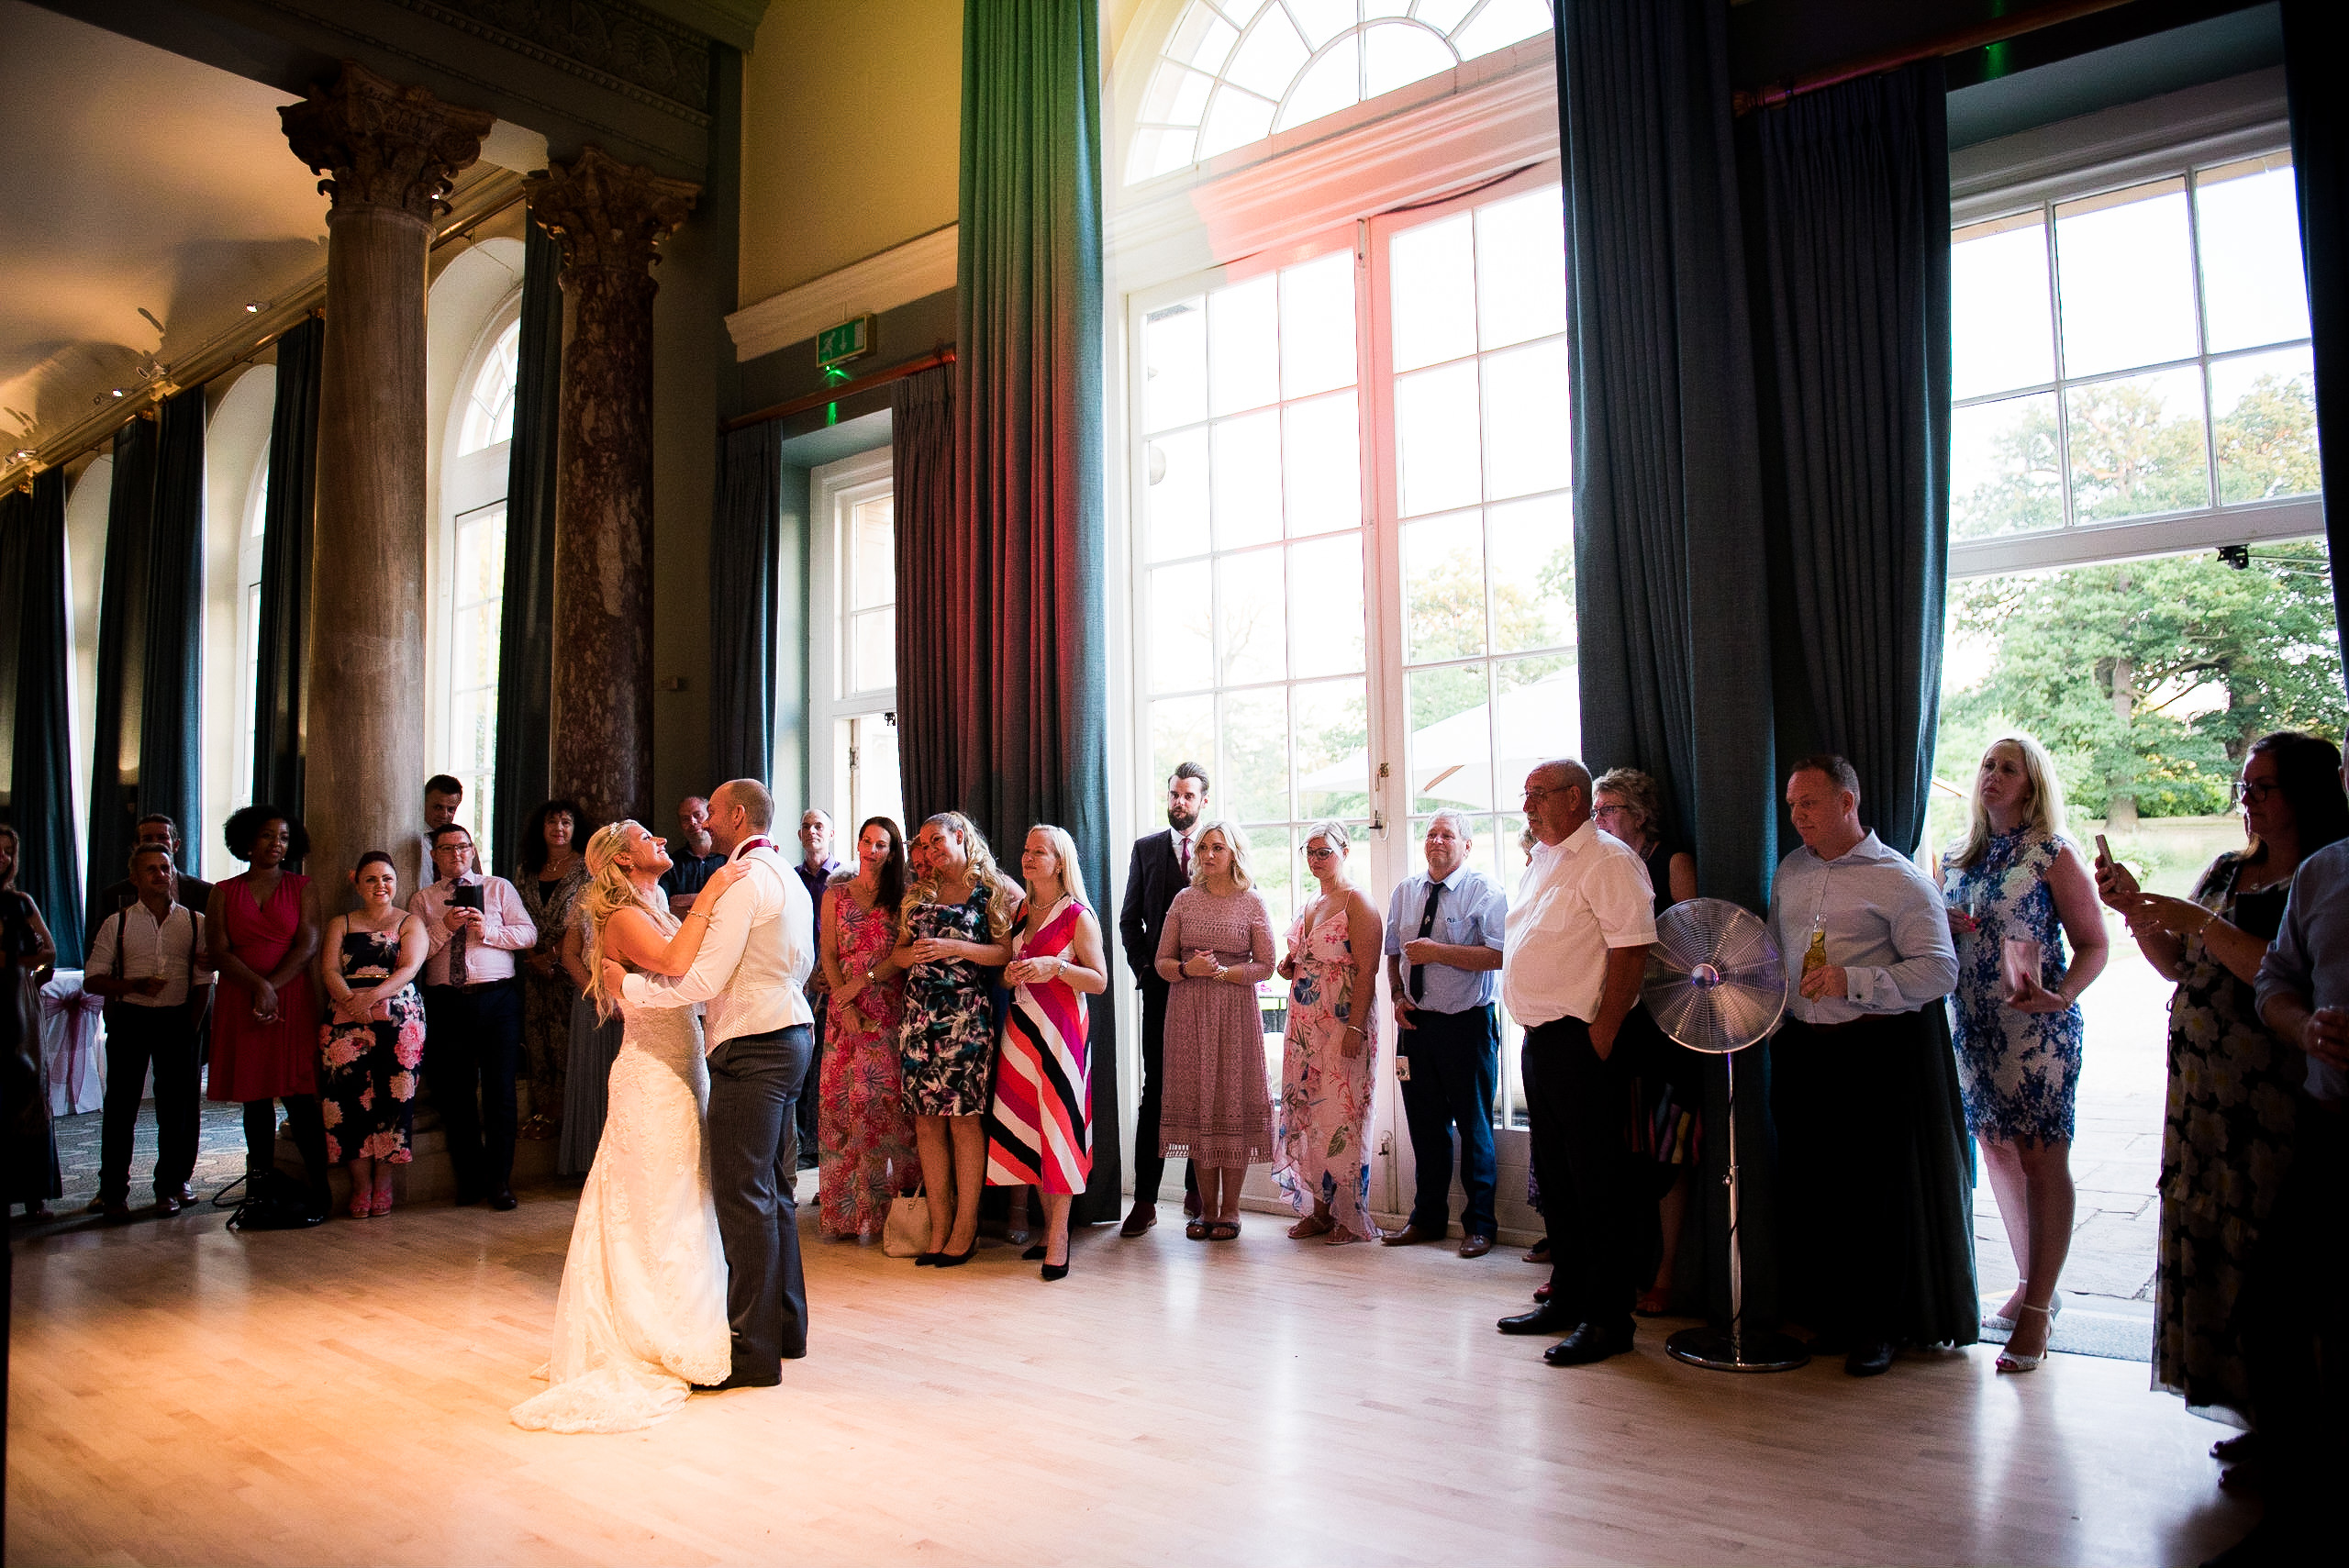 First dance at Woburn Sculpture gallery and Woburn Estate